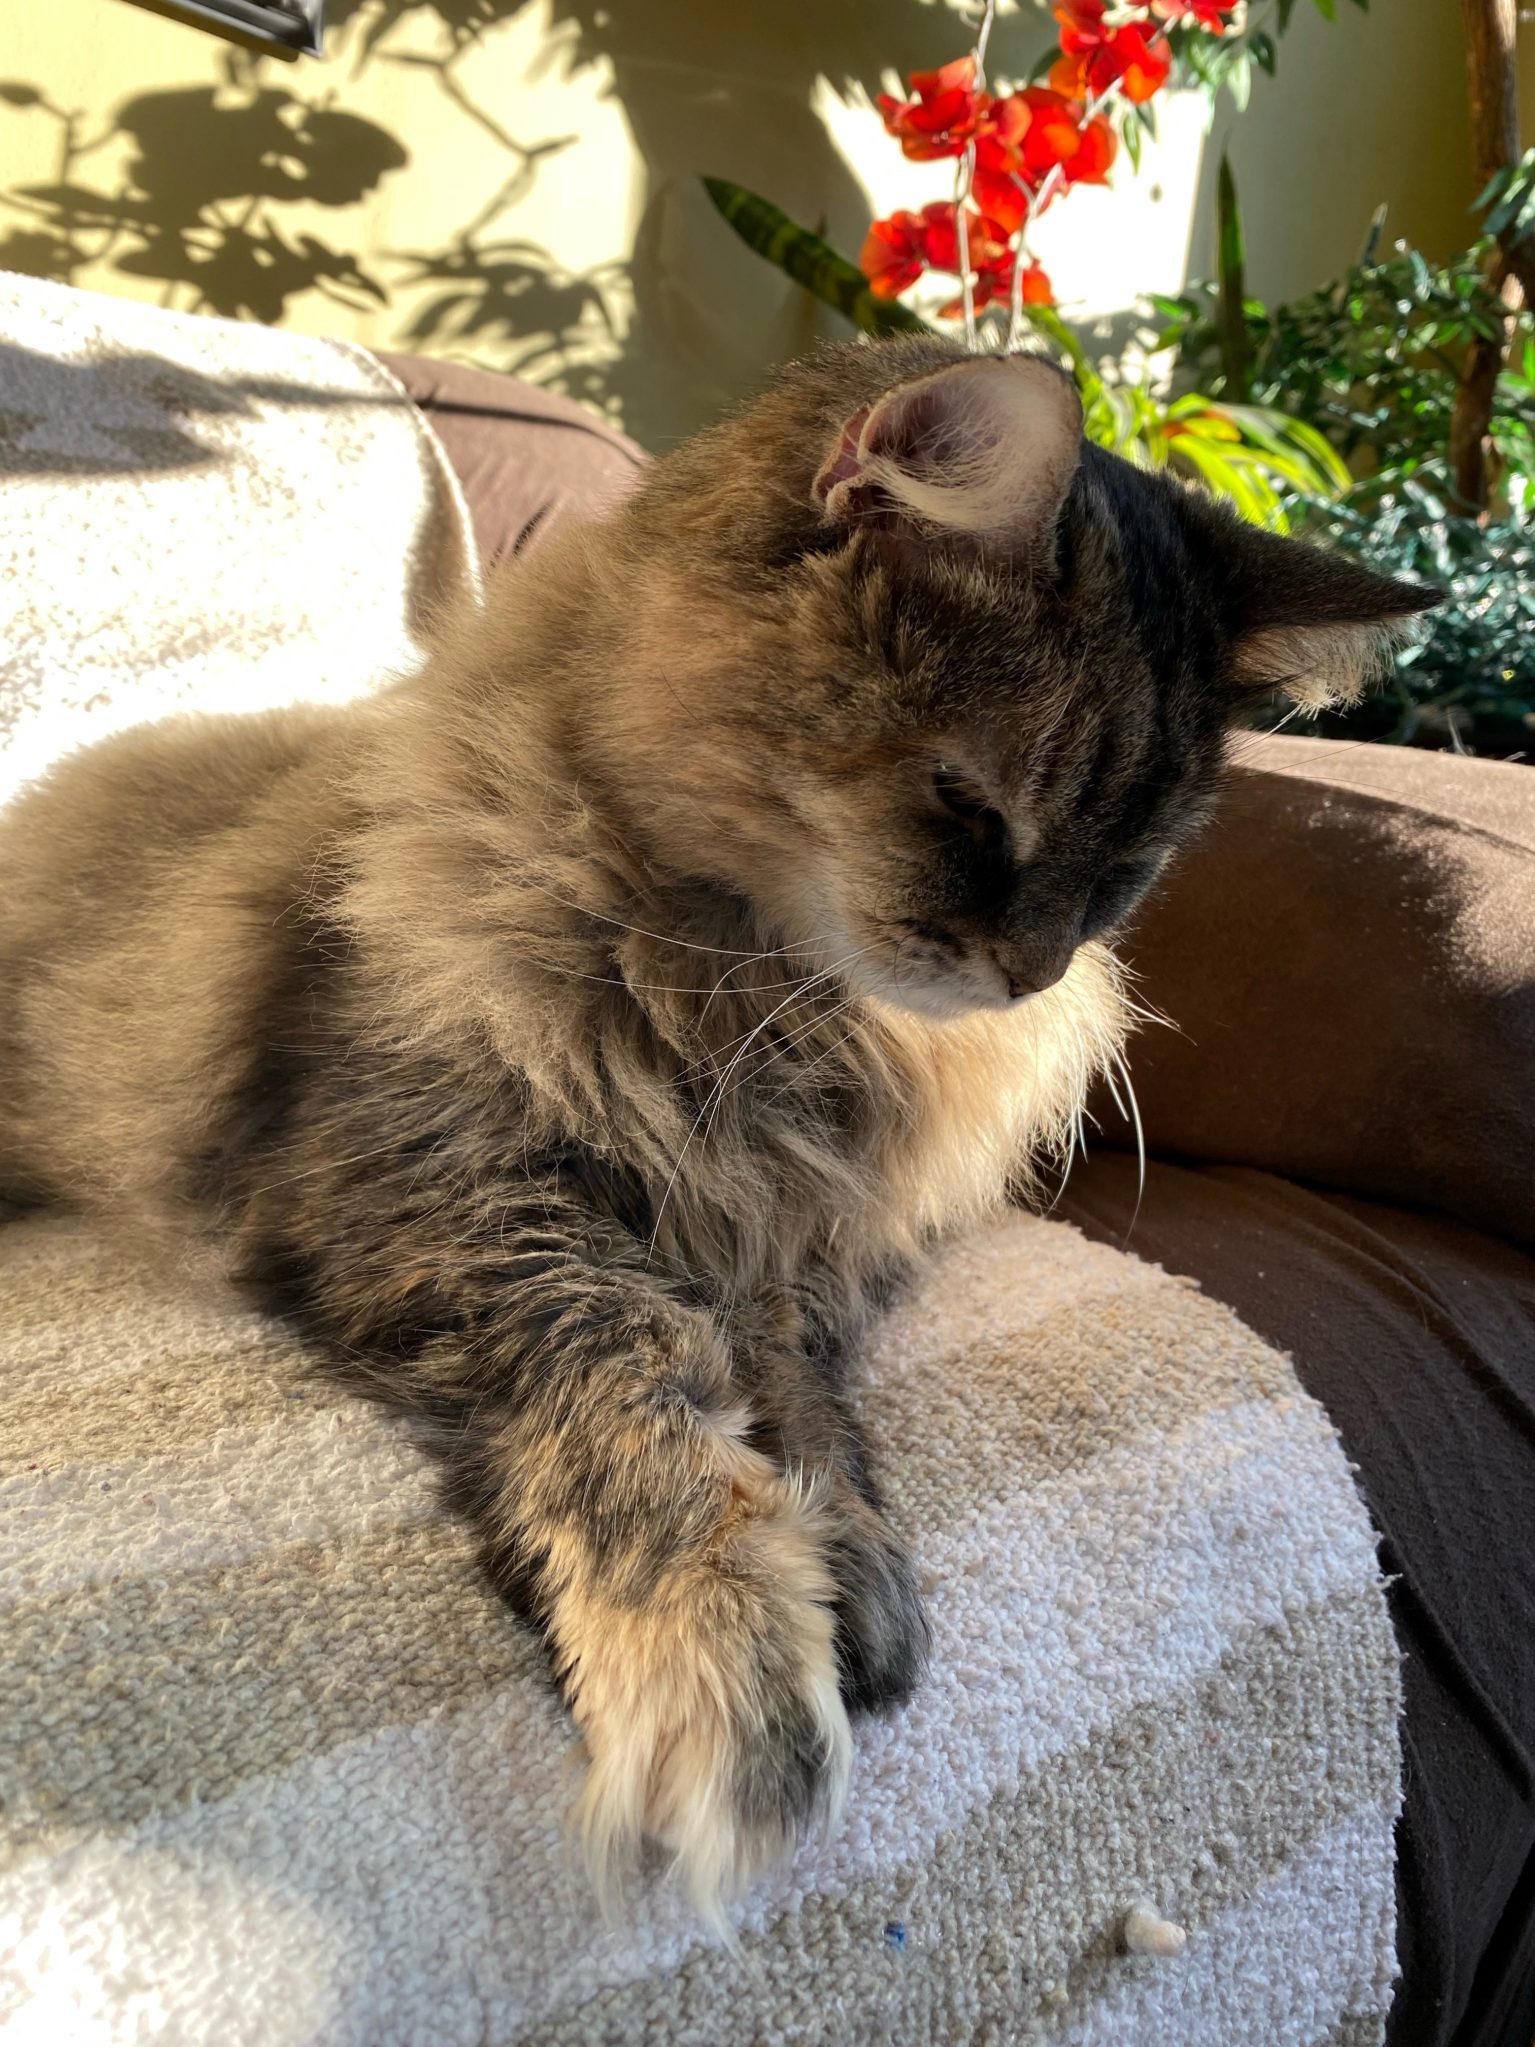 16-year-old cat named Destiny